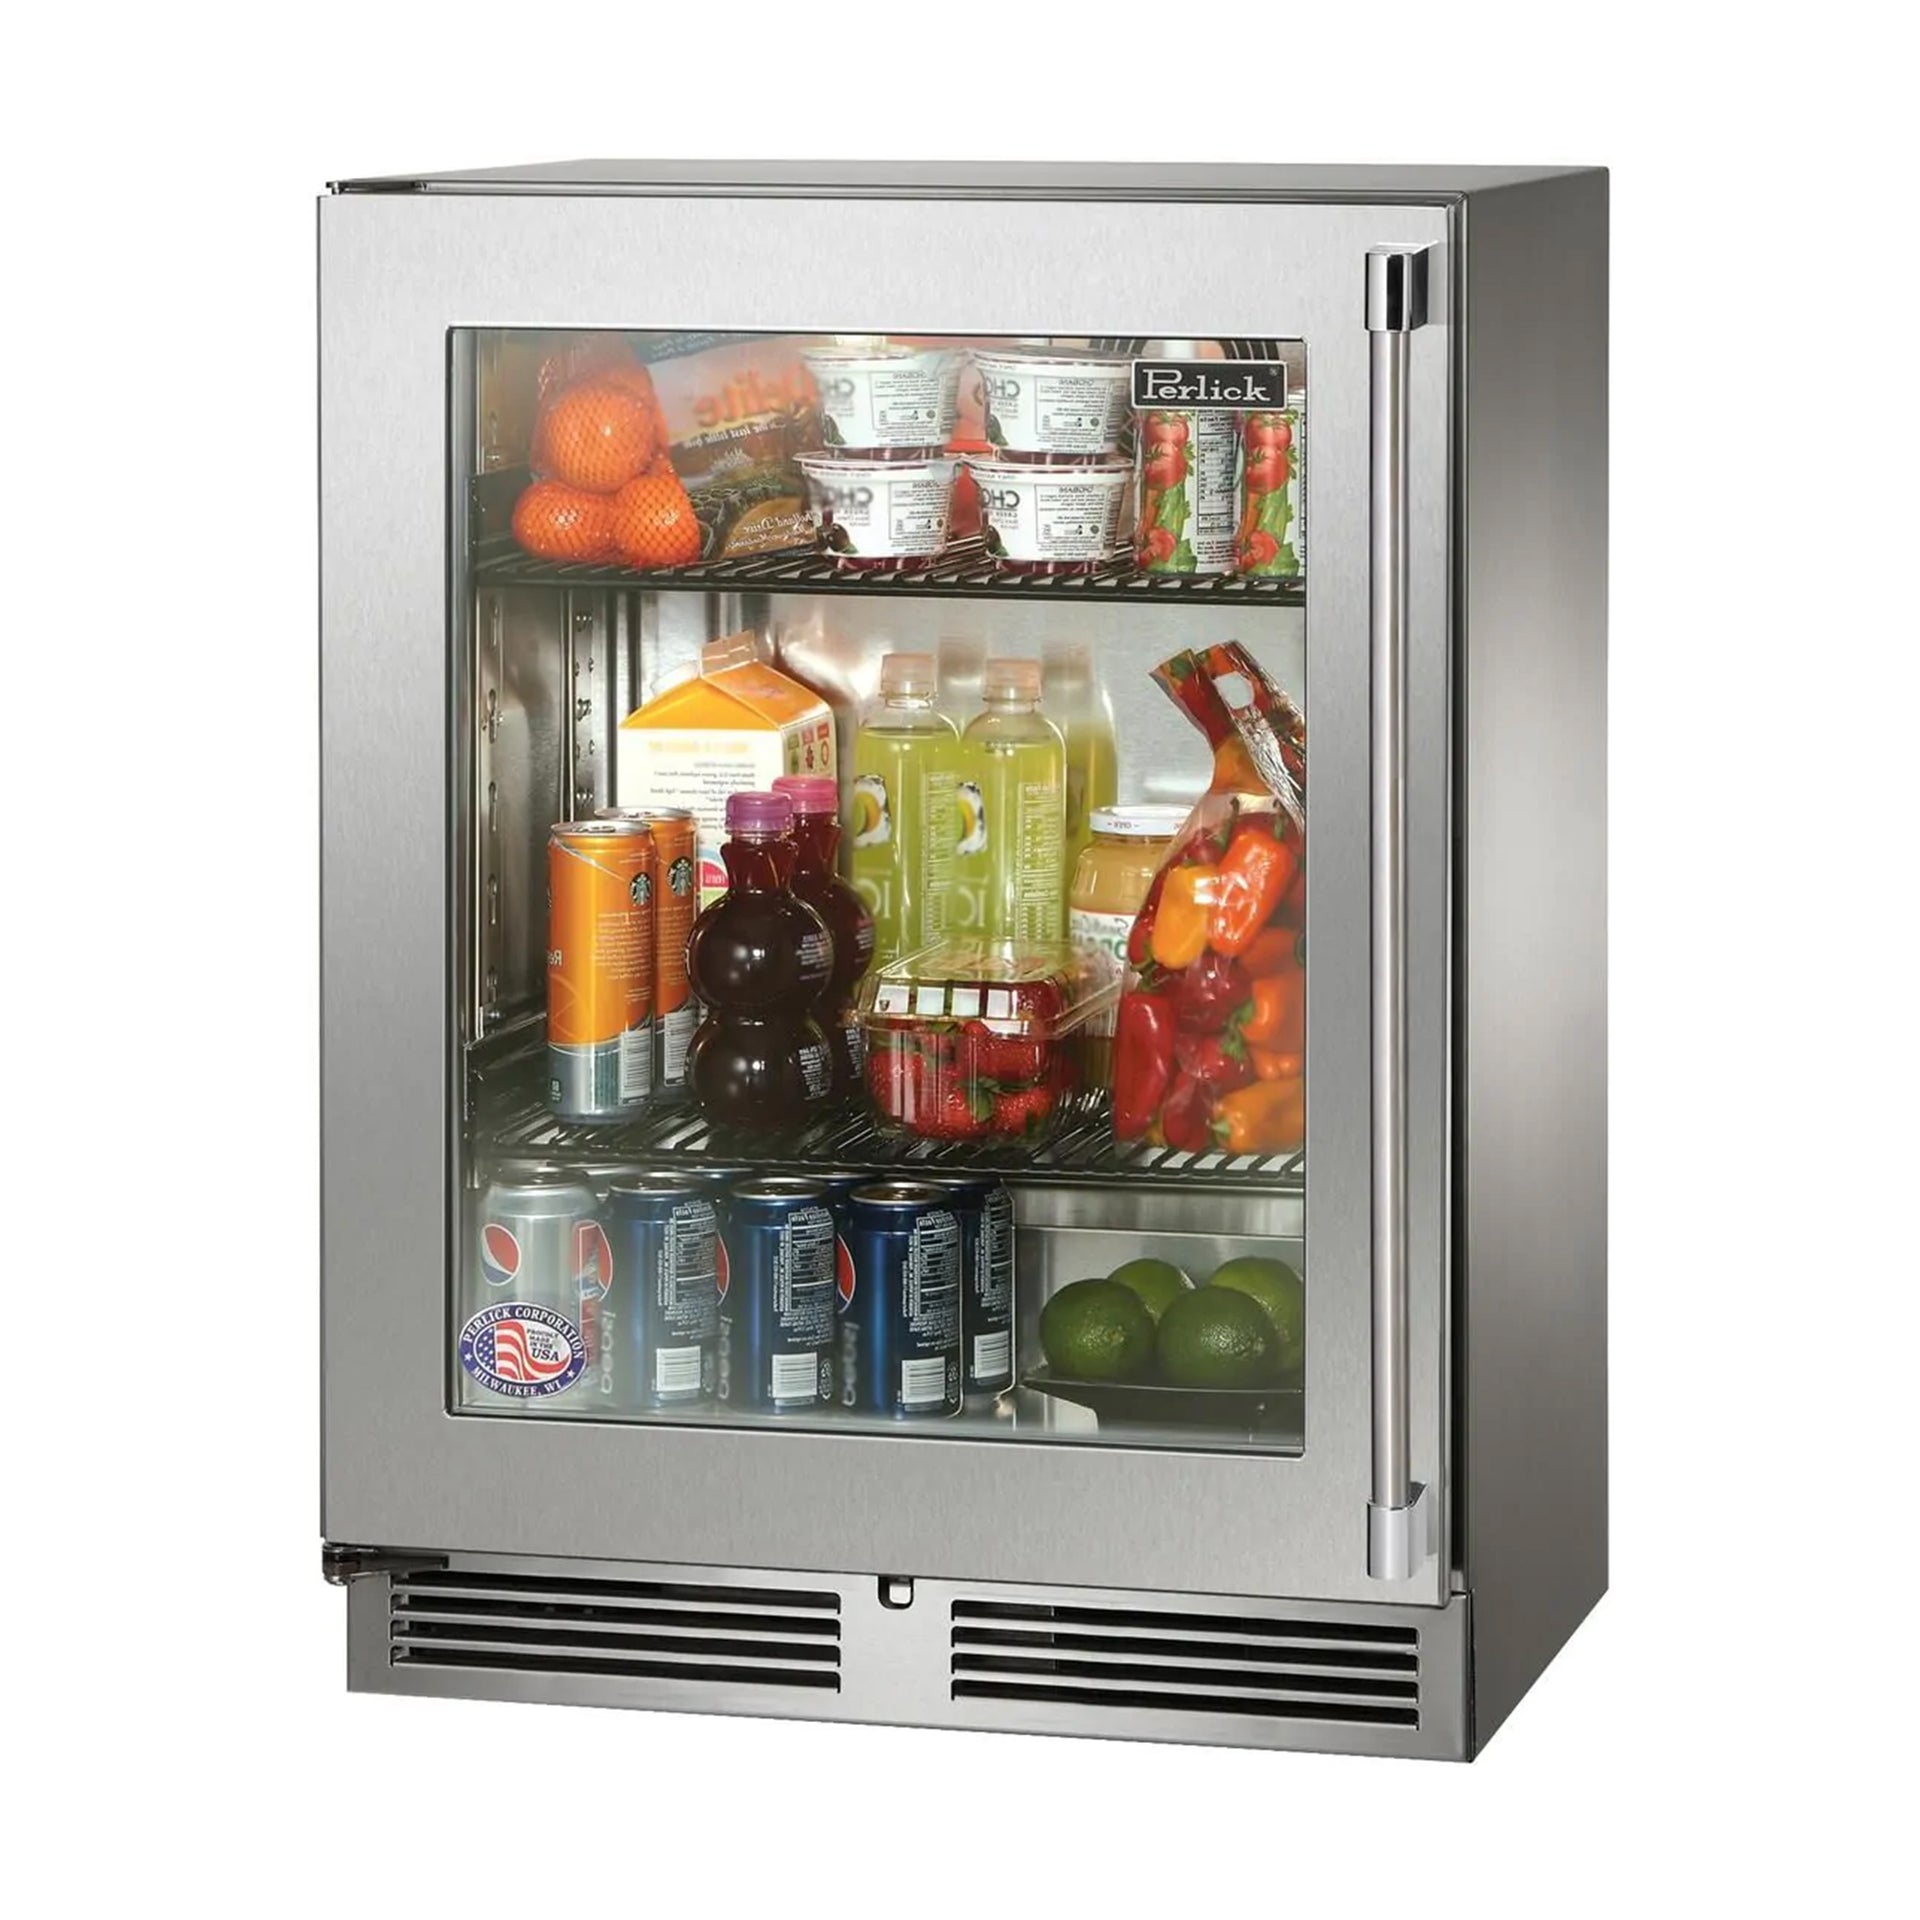 Perlick HH24BS-4-3R 18 Depth Signature Series Sottile Beverage Center -  Stainless Steel Glass Door - Right Hinge